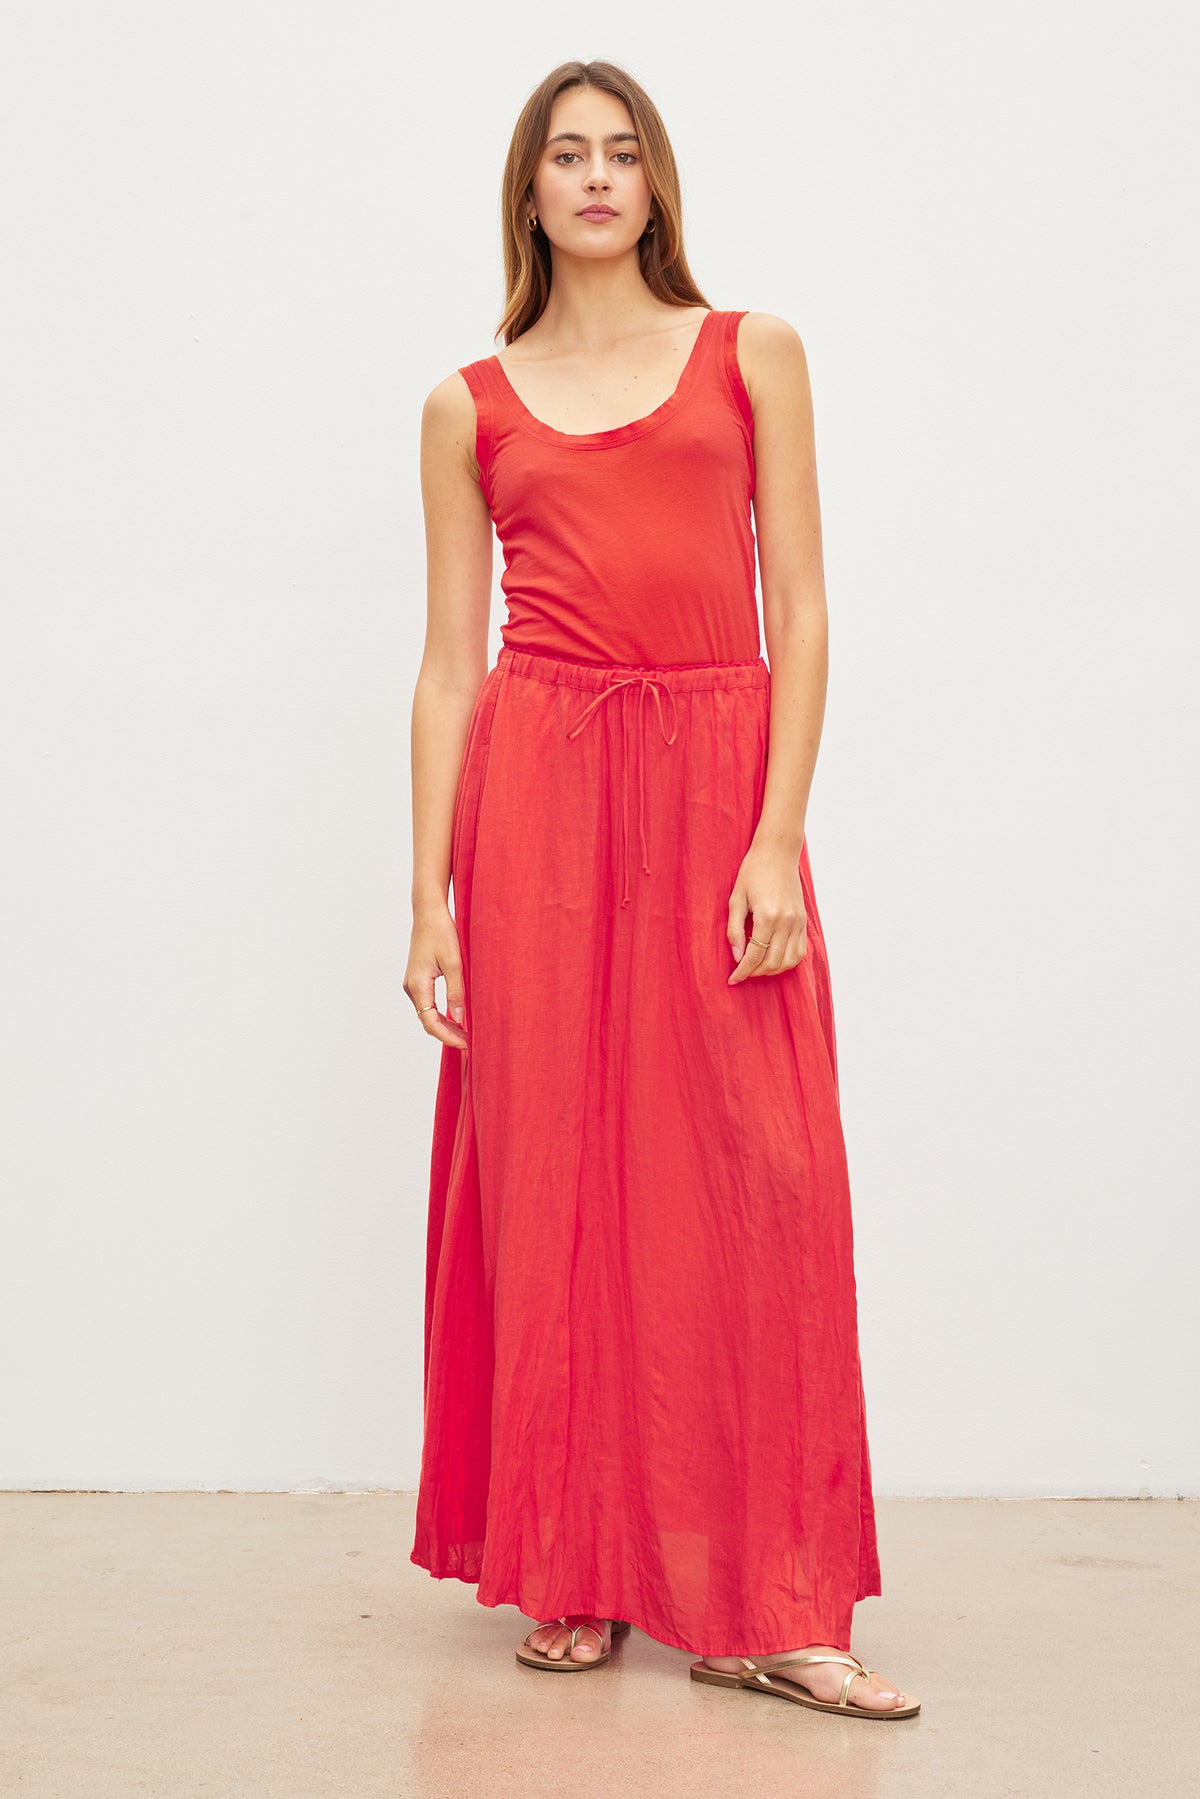 A woman donning the Velvet by Graham & Spencer BAILEY LINEN MAXI SKIRT, a stunning red maxi dress made from woven linen fabric, featuring an elegant elastic drawstring waist for added comfort and style.-35955626770625